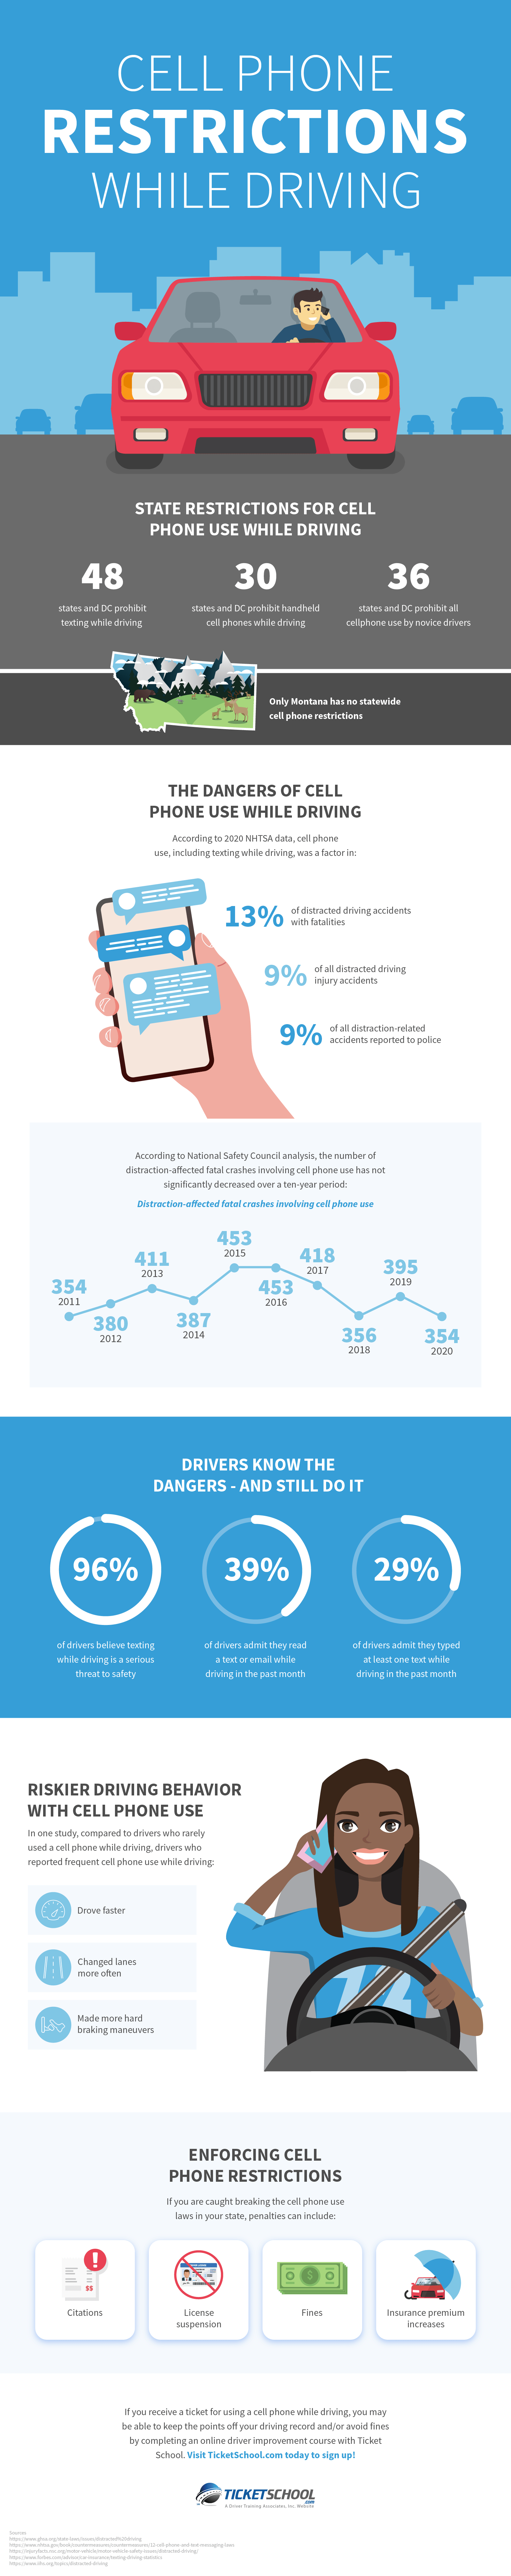 Cell Phone Restrictions While Driving Infographic